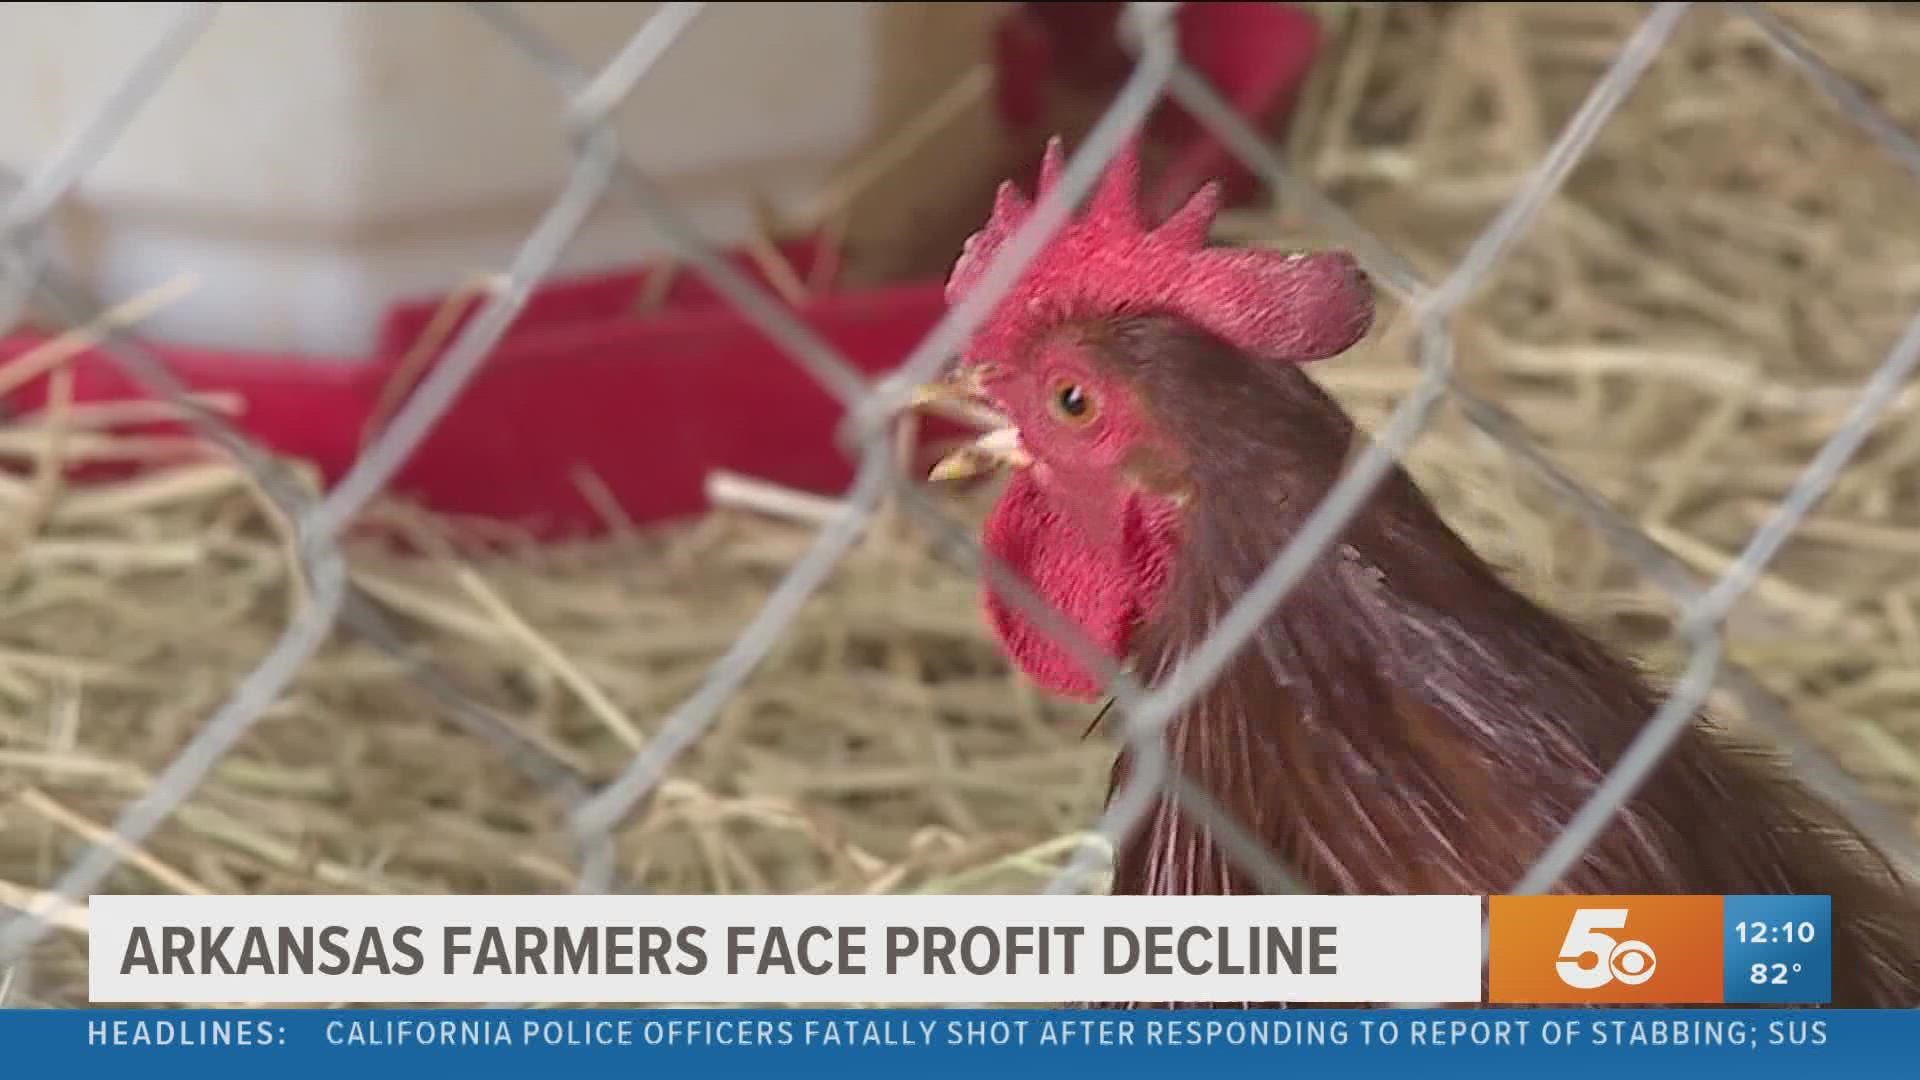 Farmers and ranchers are faced with higher prices, resulting in a forecasted profit decrease of 4.5% year-over-year, experts say.